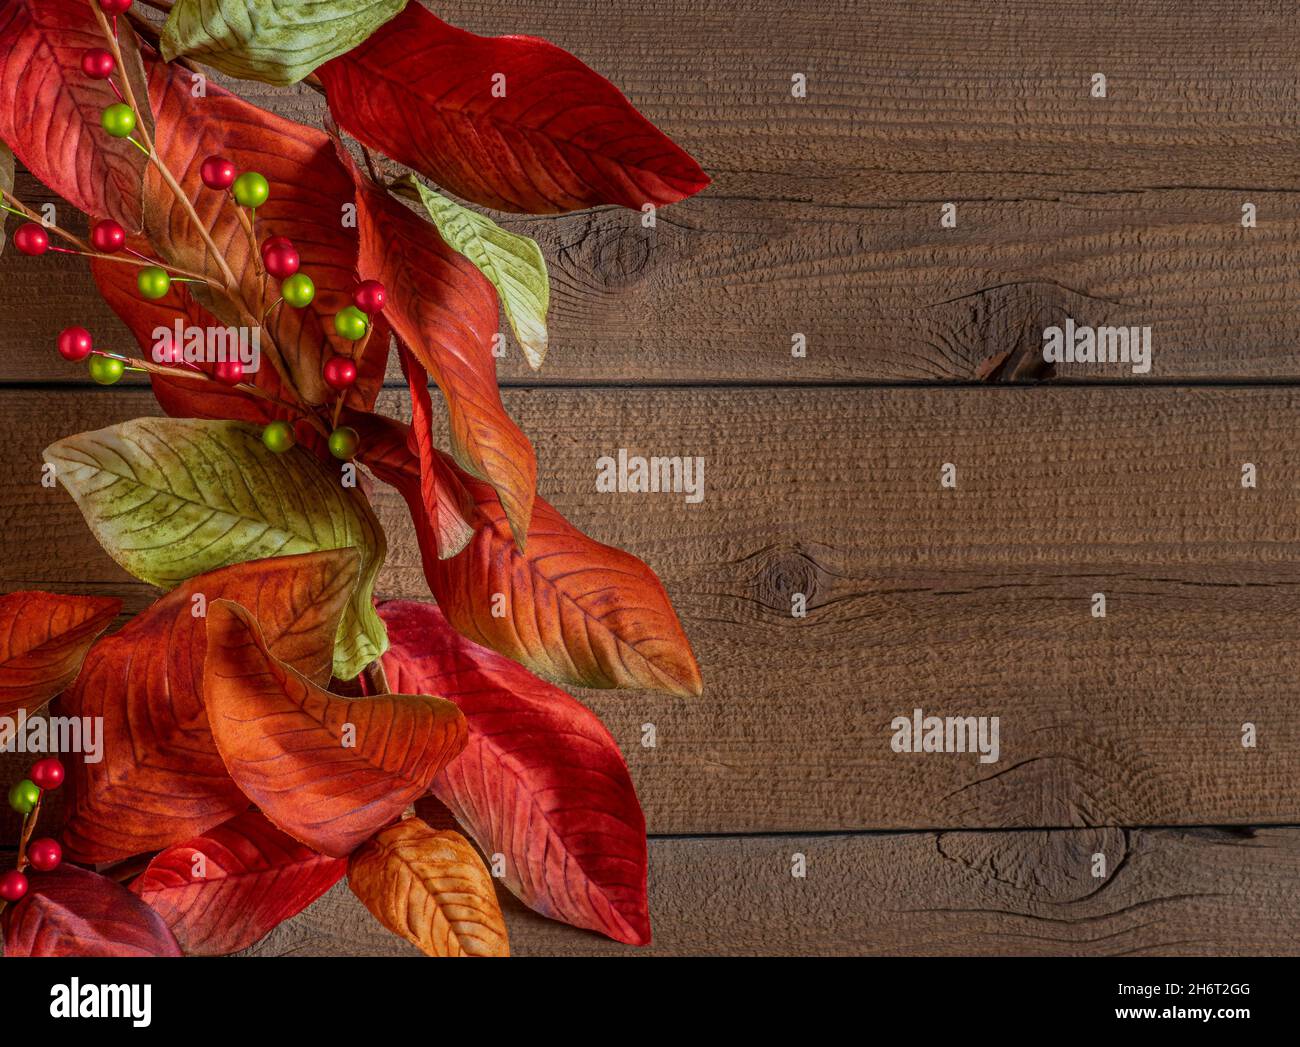 Autumn and Christmas colors fill a leafy wreath on a wooden background, Good for fall and Christmas both. Stock Photo